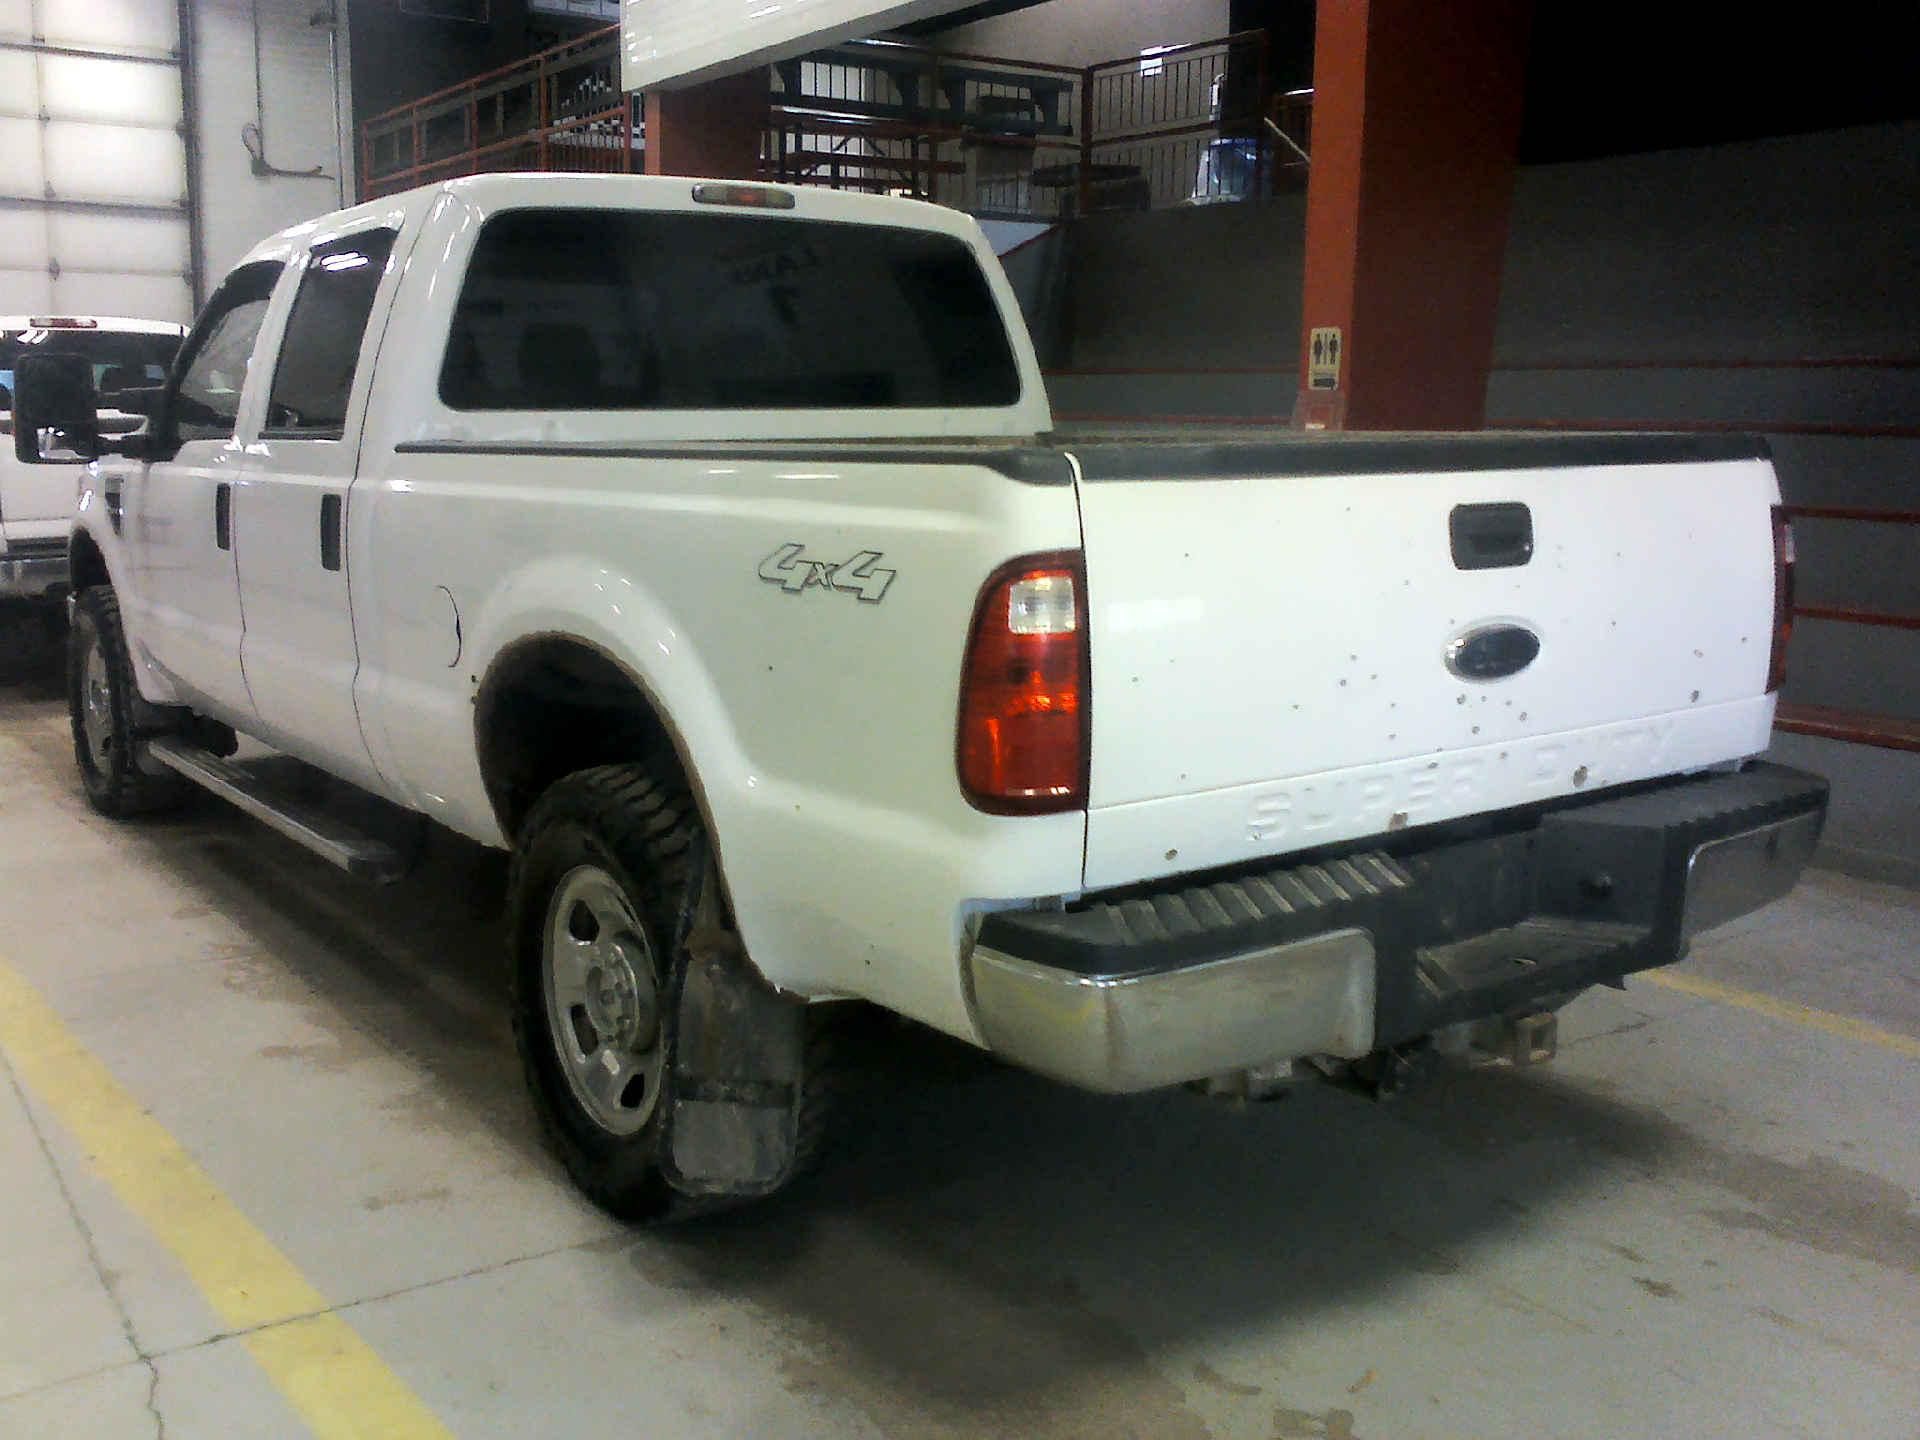 2008 FORD F-350 SD XLT CREW CAB 4WD 6.4L V8 OHV 32V TURBO DIESEL AUTOMATIC SN:1FTWW31R18EE34885 - Image 2 of 9